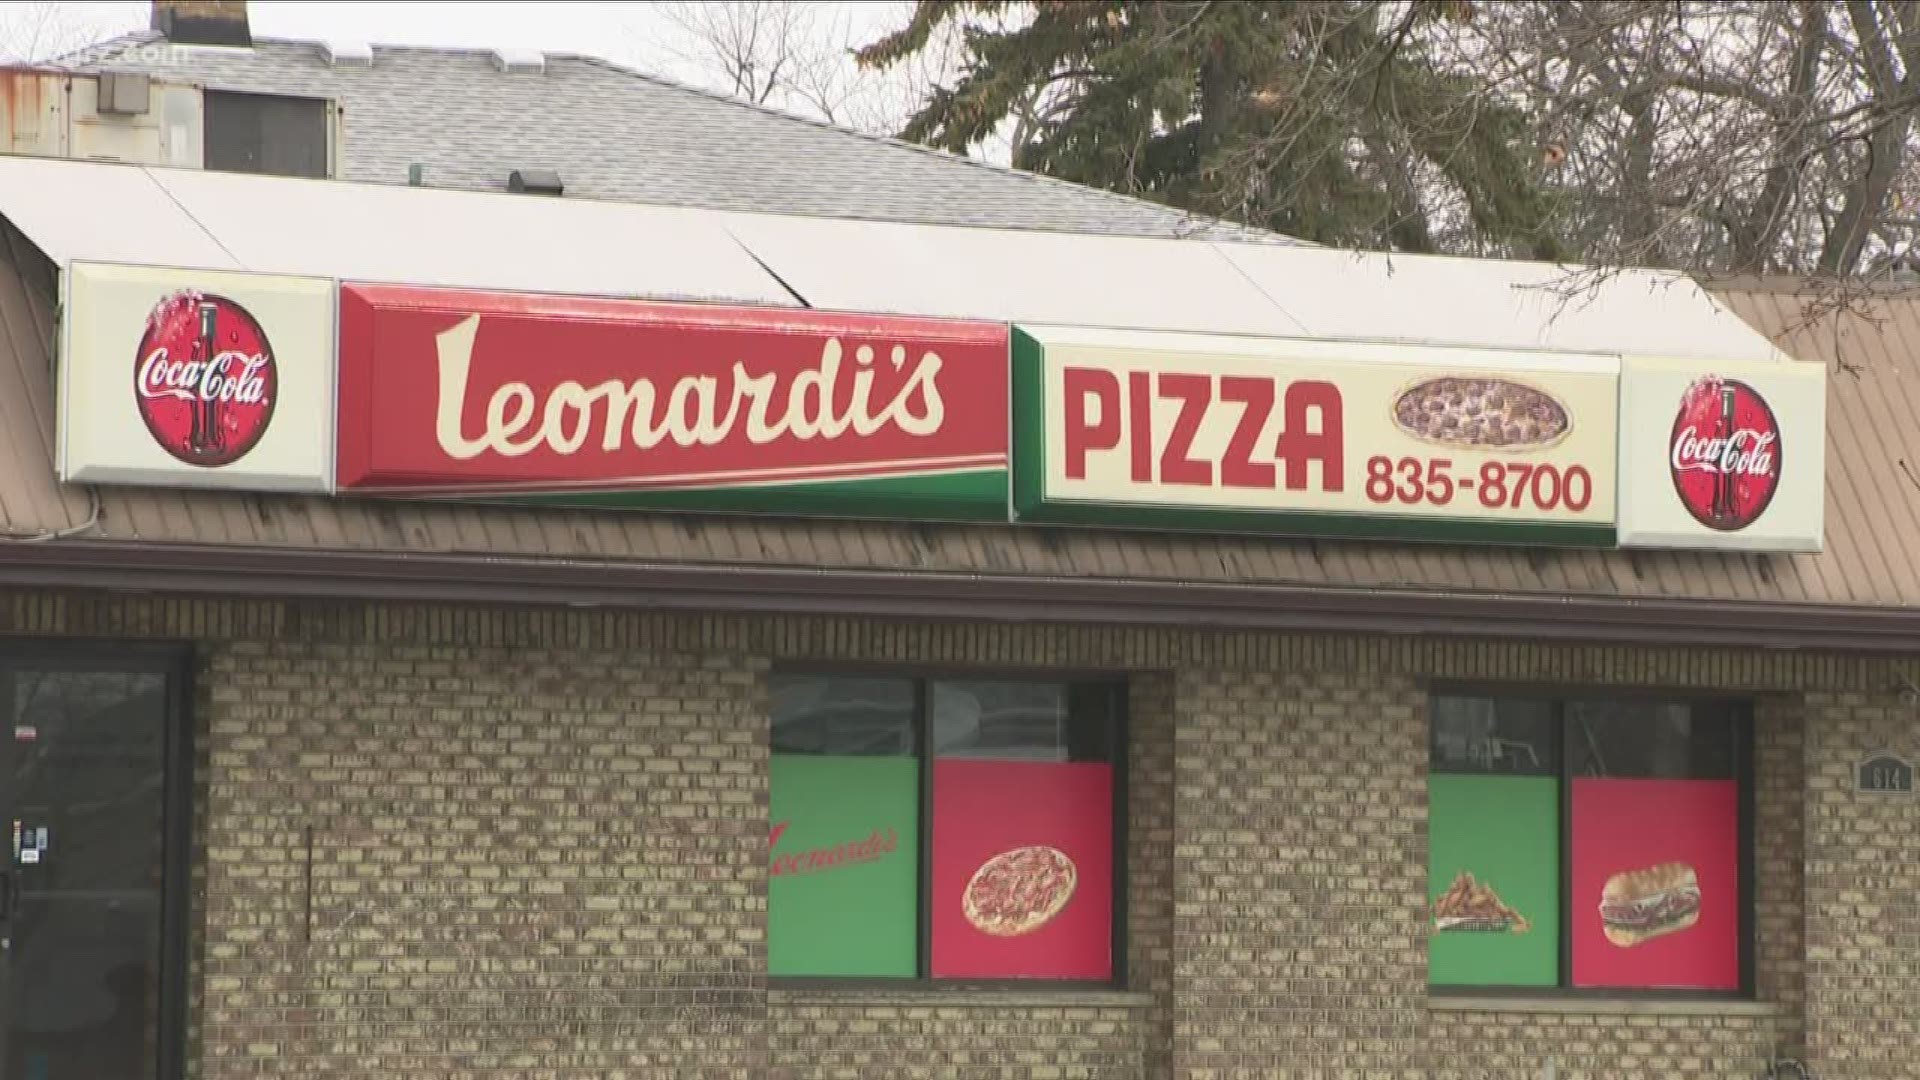 Leonardi's pizza closes after 47 years